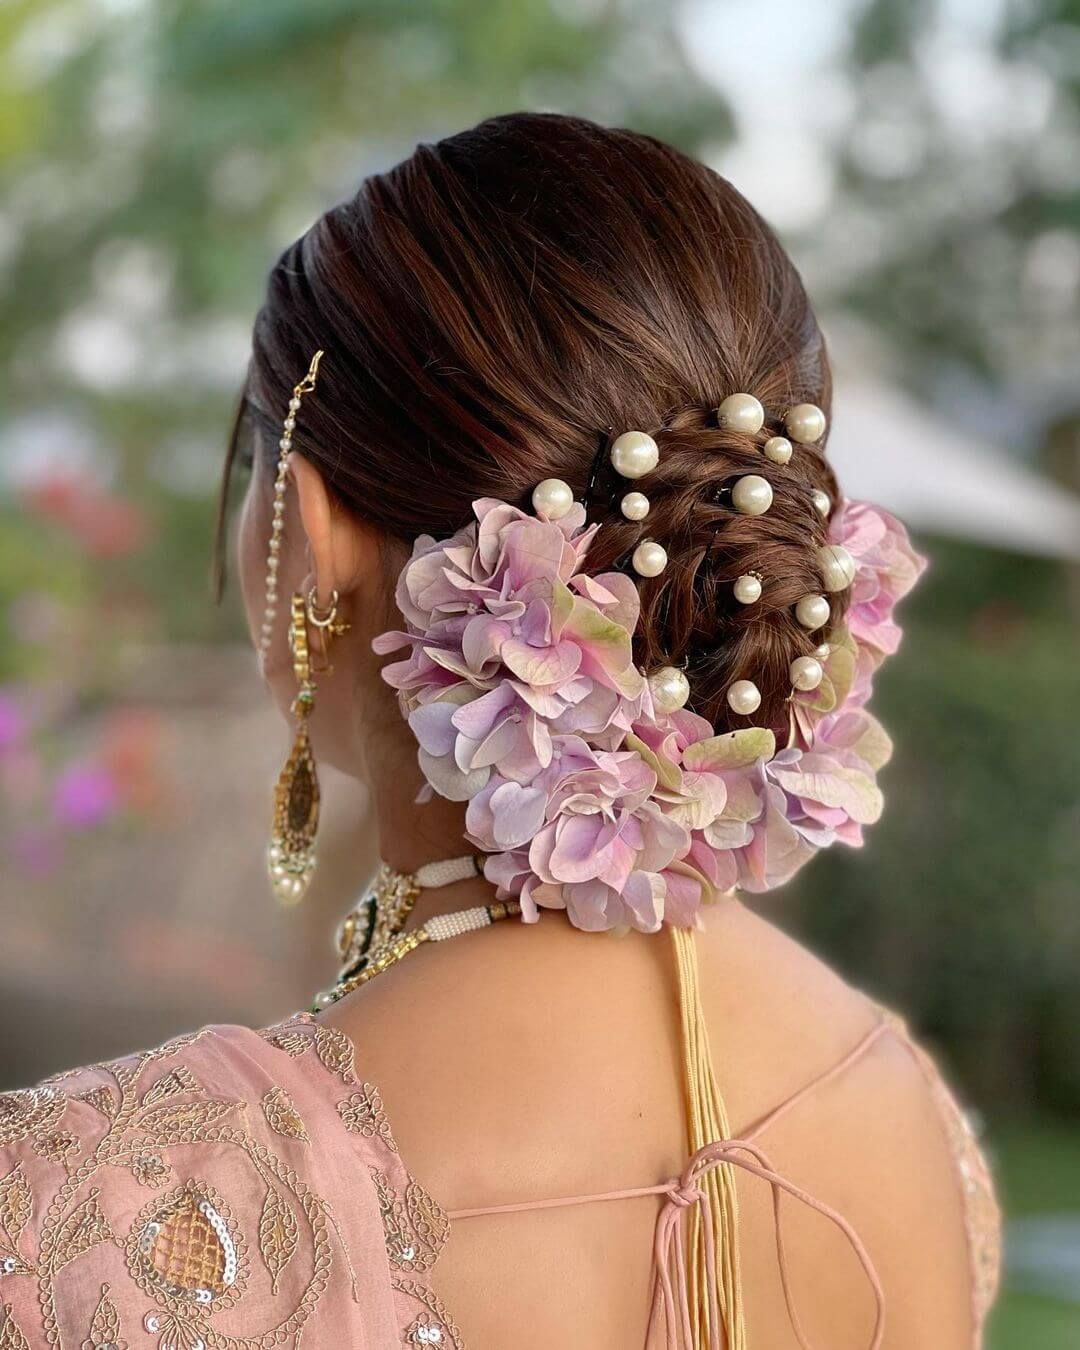 Stunning Bridal Hairstyles for an Indian Wedding